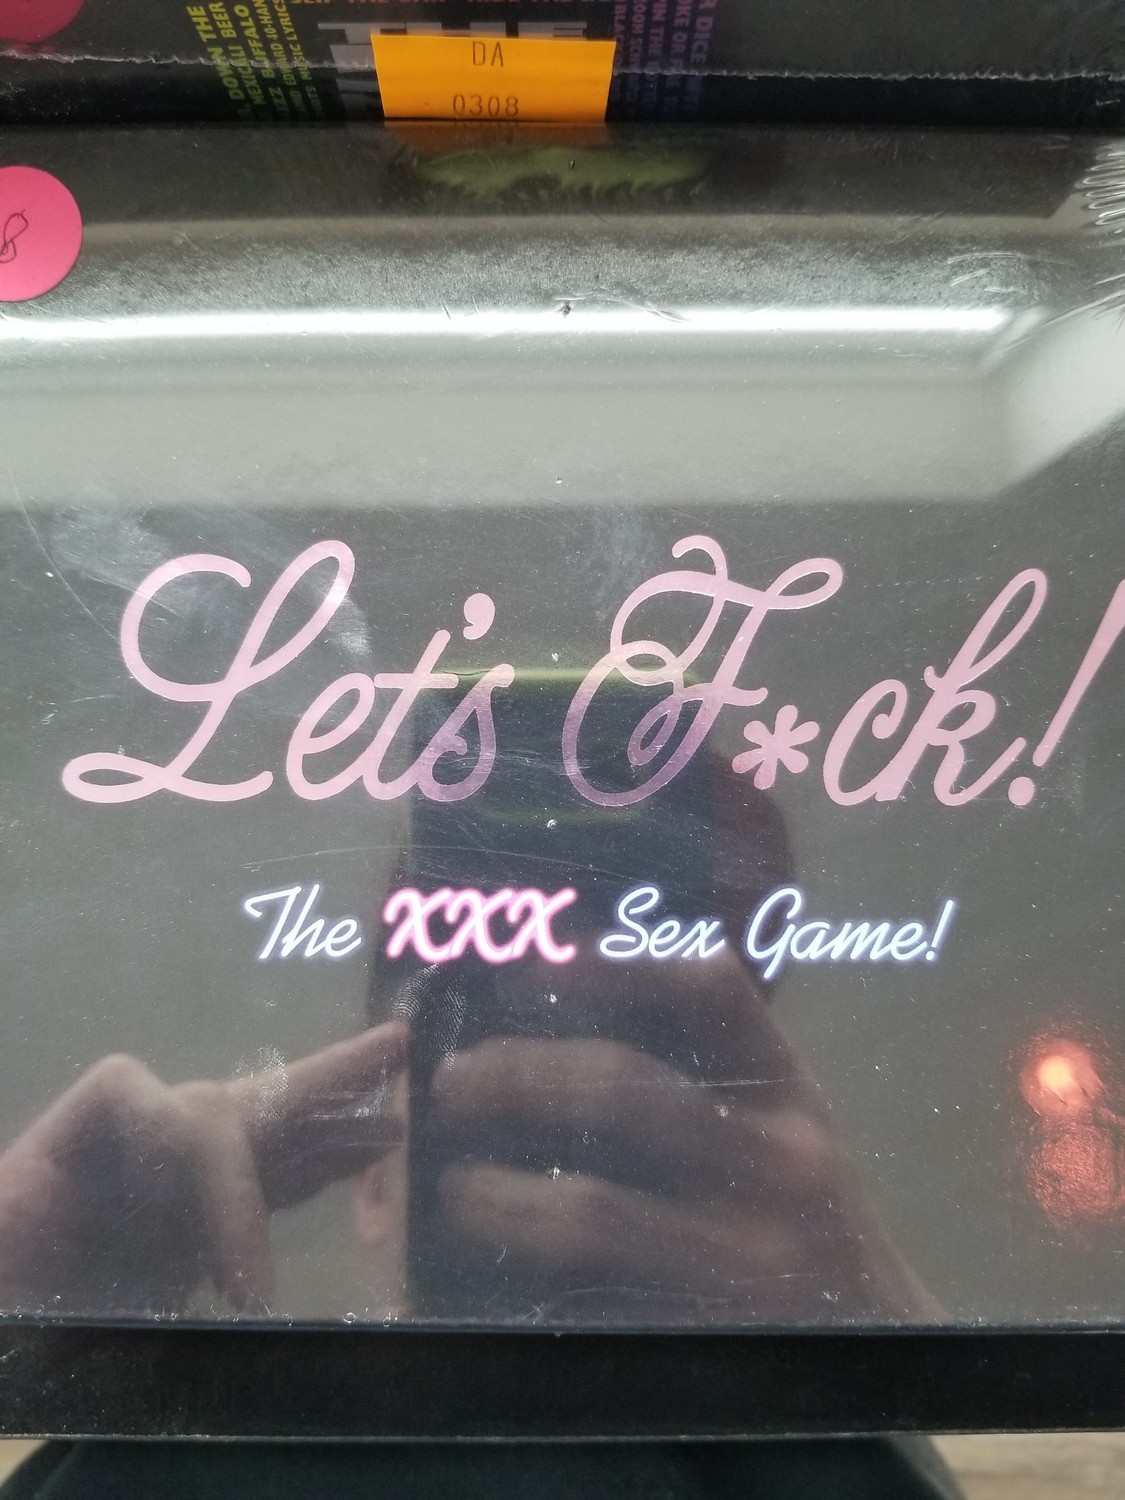 GAME LETS F*CK THE XXX SEX GAME